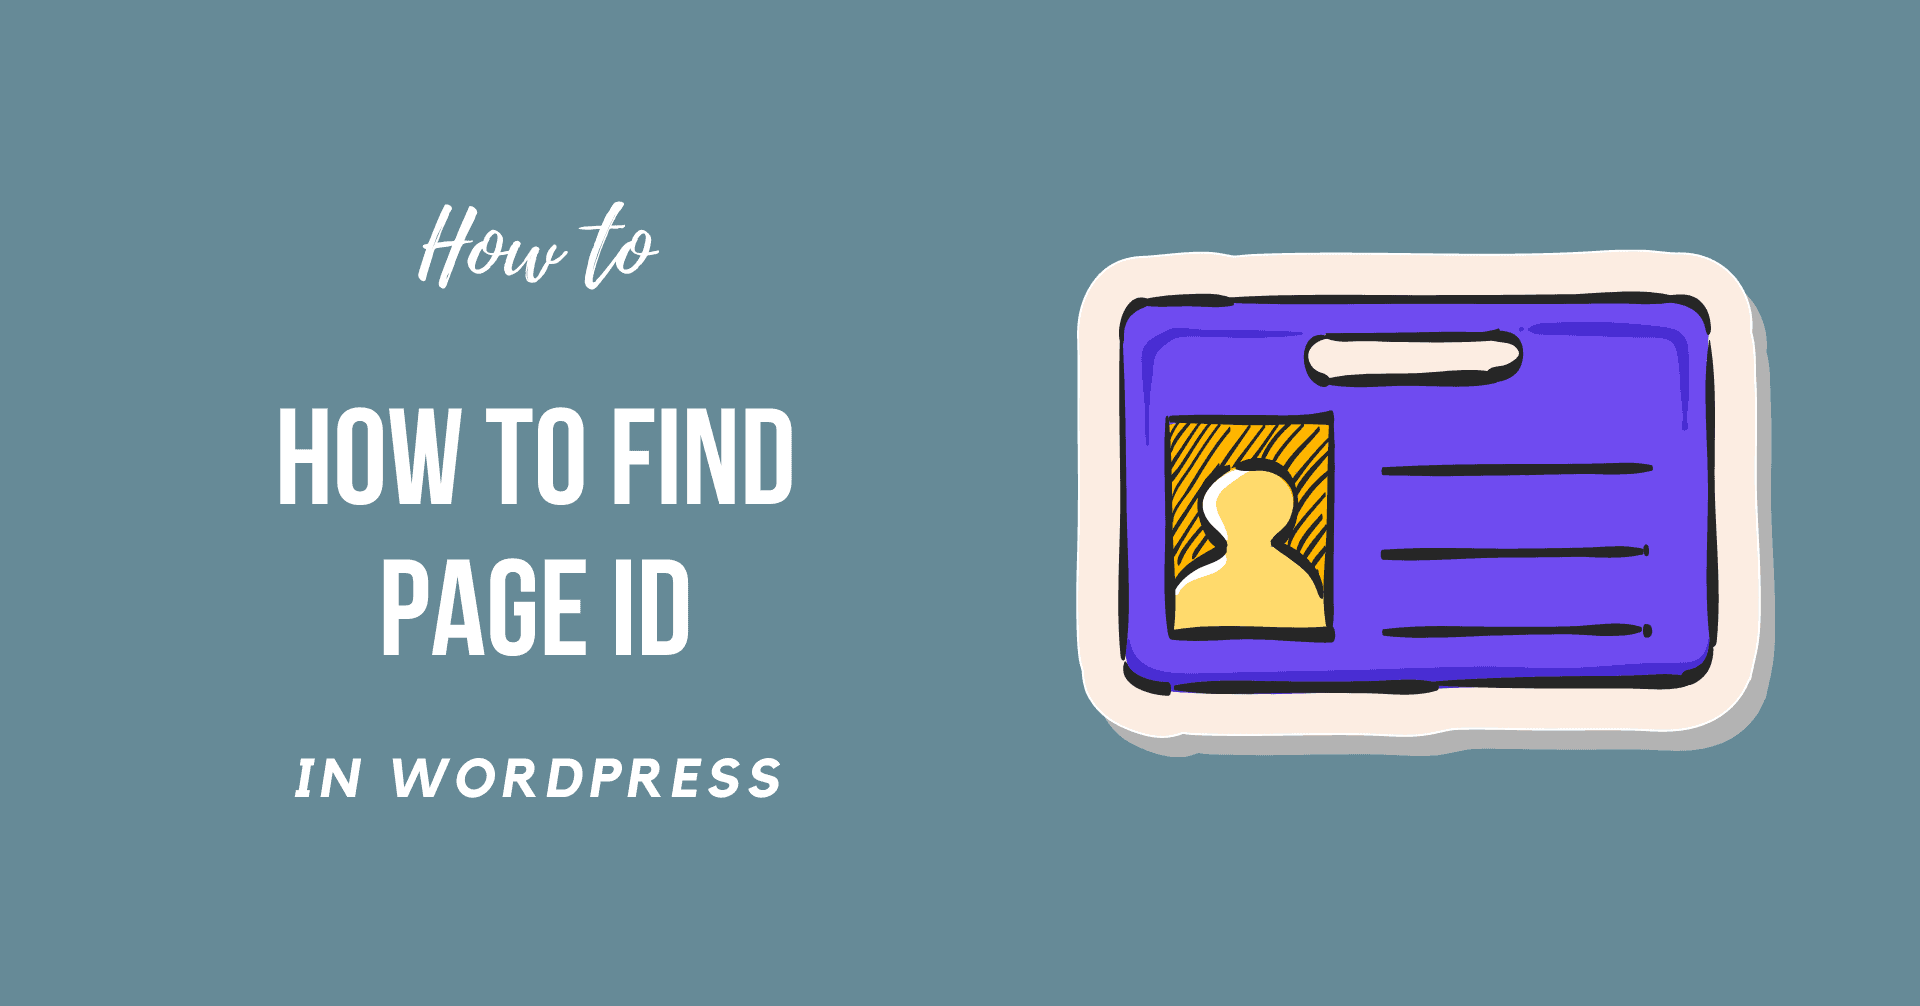 How to Find Page ID in WordPress